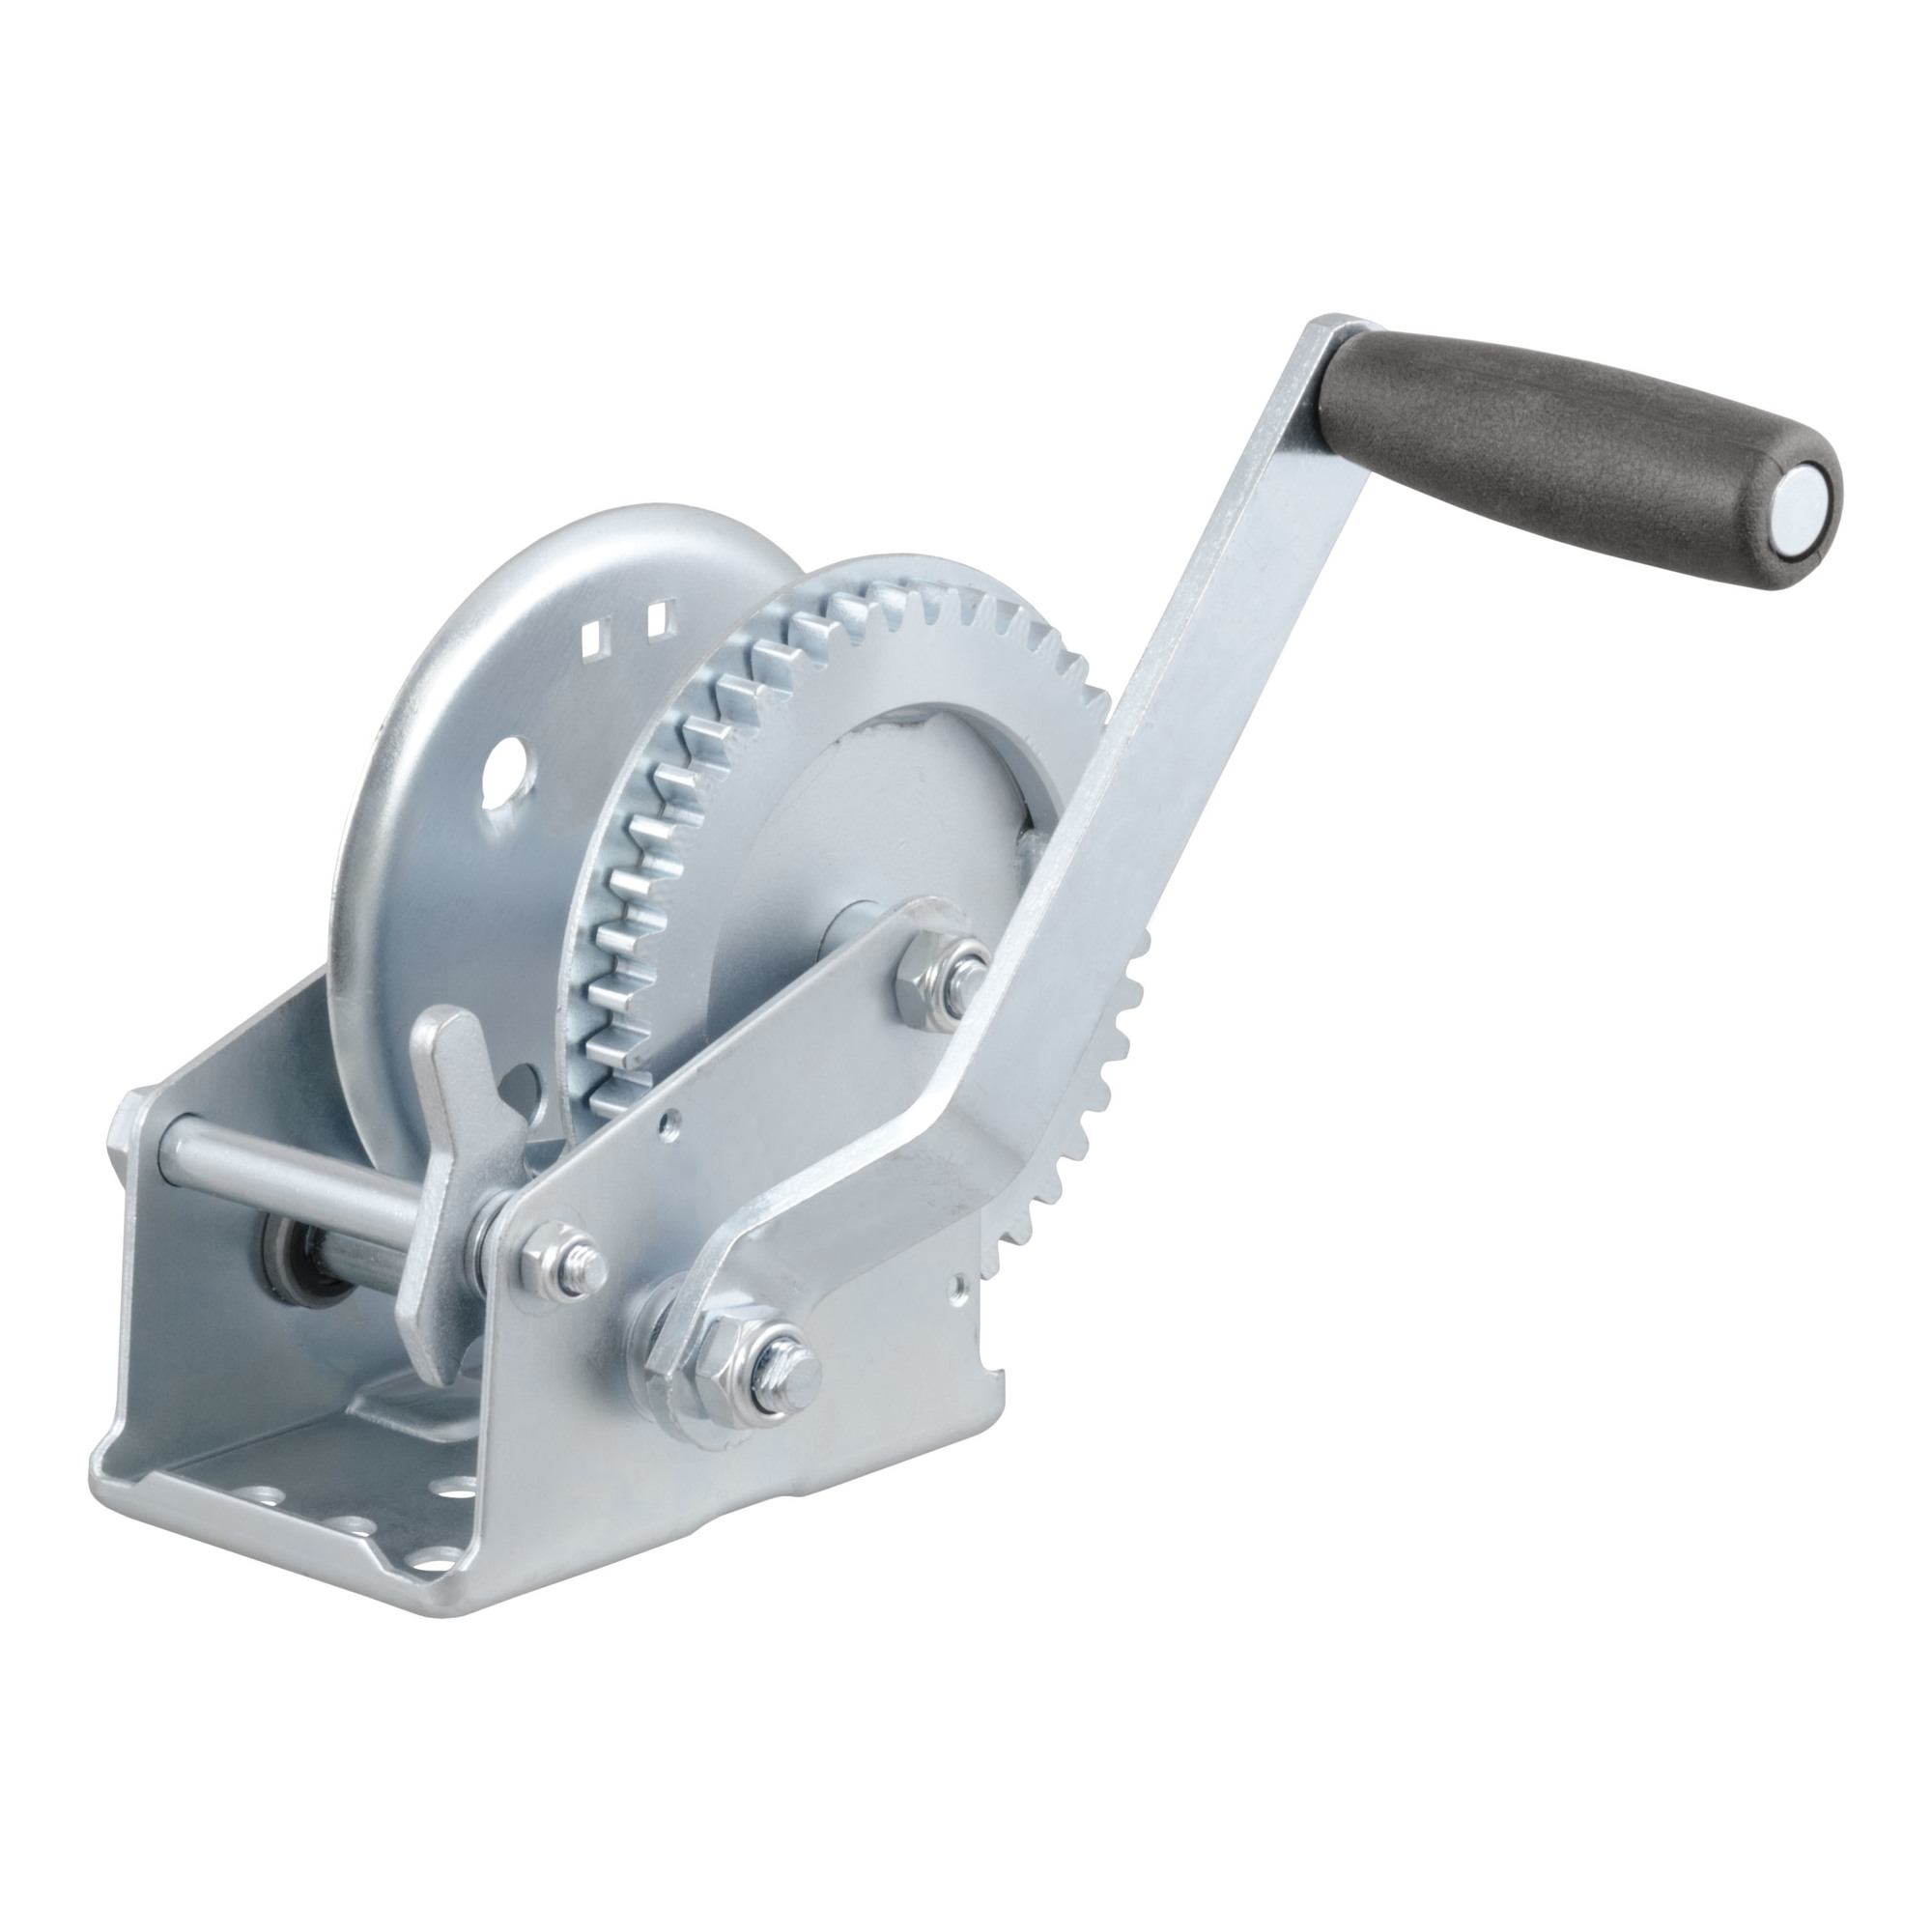 Curt Manufacturing, Hand Crank Winch (1,200 lbs, 7-1/2Inch Handle), Model 29424